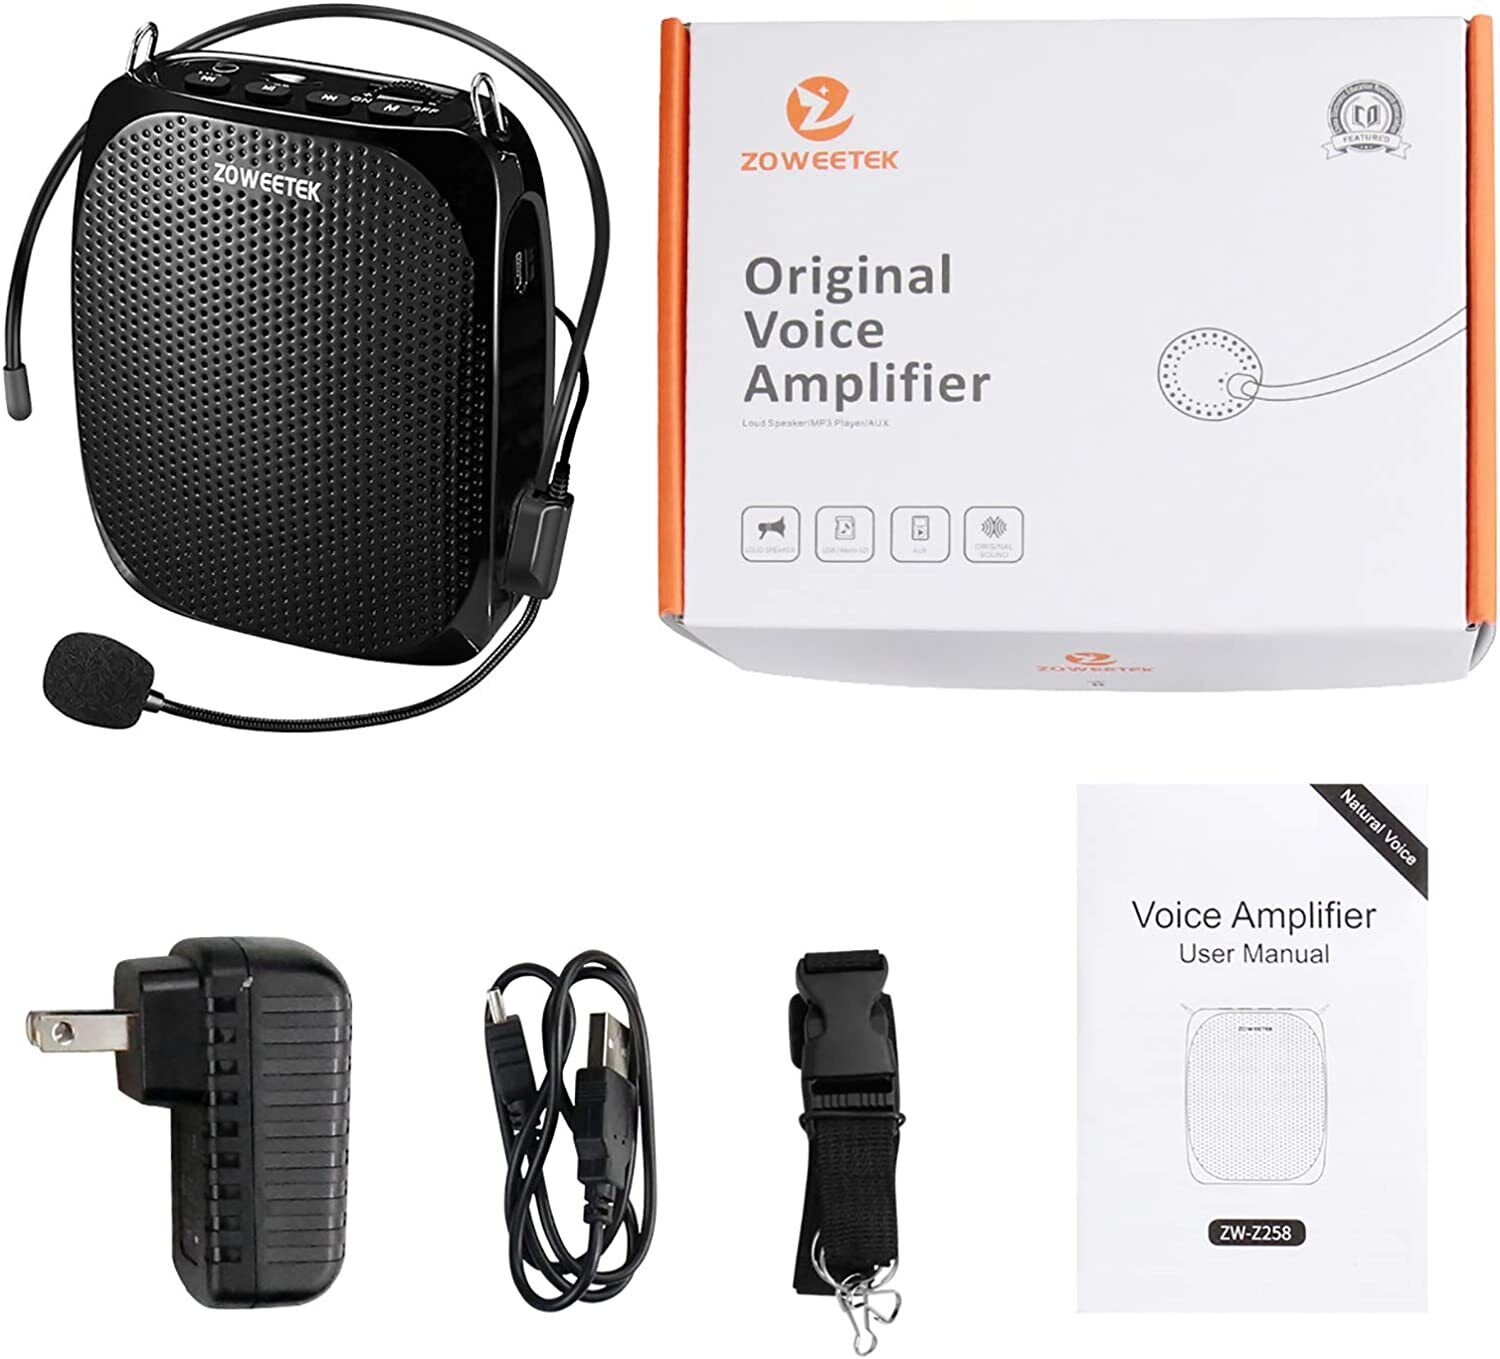 New Voice Amplifier Speaker, Rechargeable, Portable w/t Wired Microphone Headset